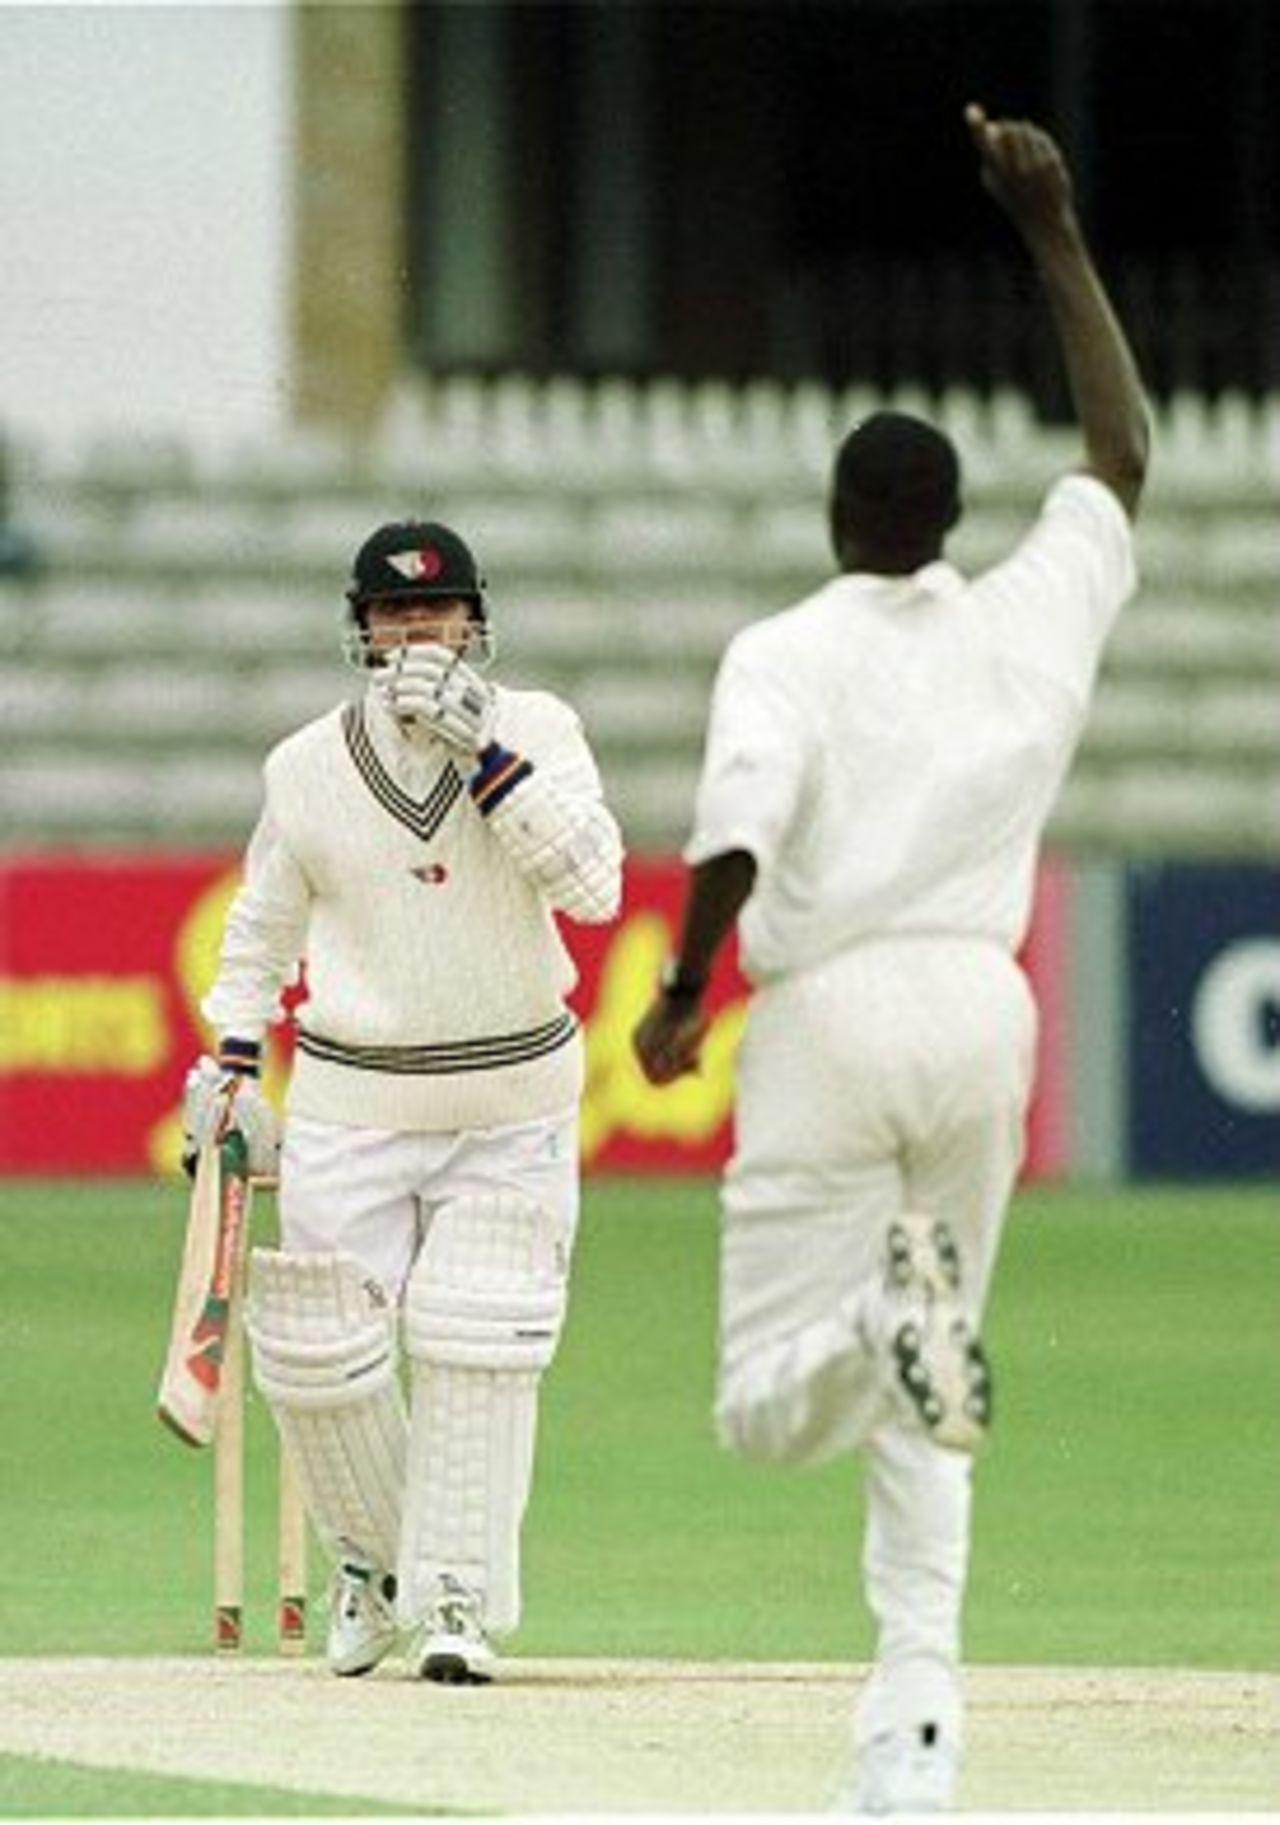 24 June 2000. Reon King of the West Indies celebrates taking the wicket of Michael Papps of New Zealand 'A' caught behind by Wayne Phillip on the final day of the match at the County Ground at Chelmsford in Essex.